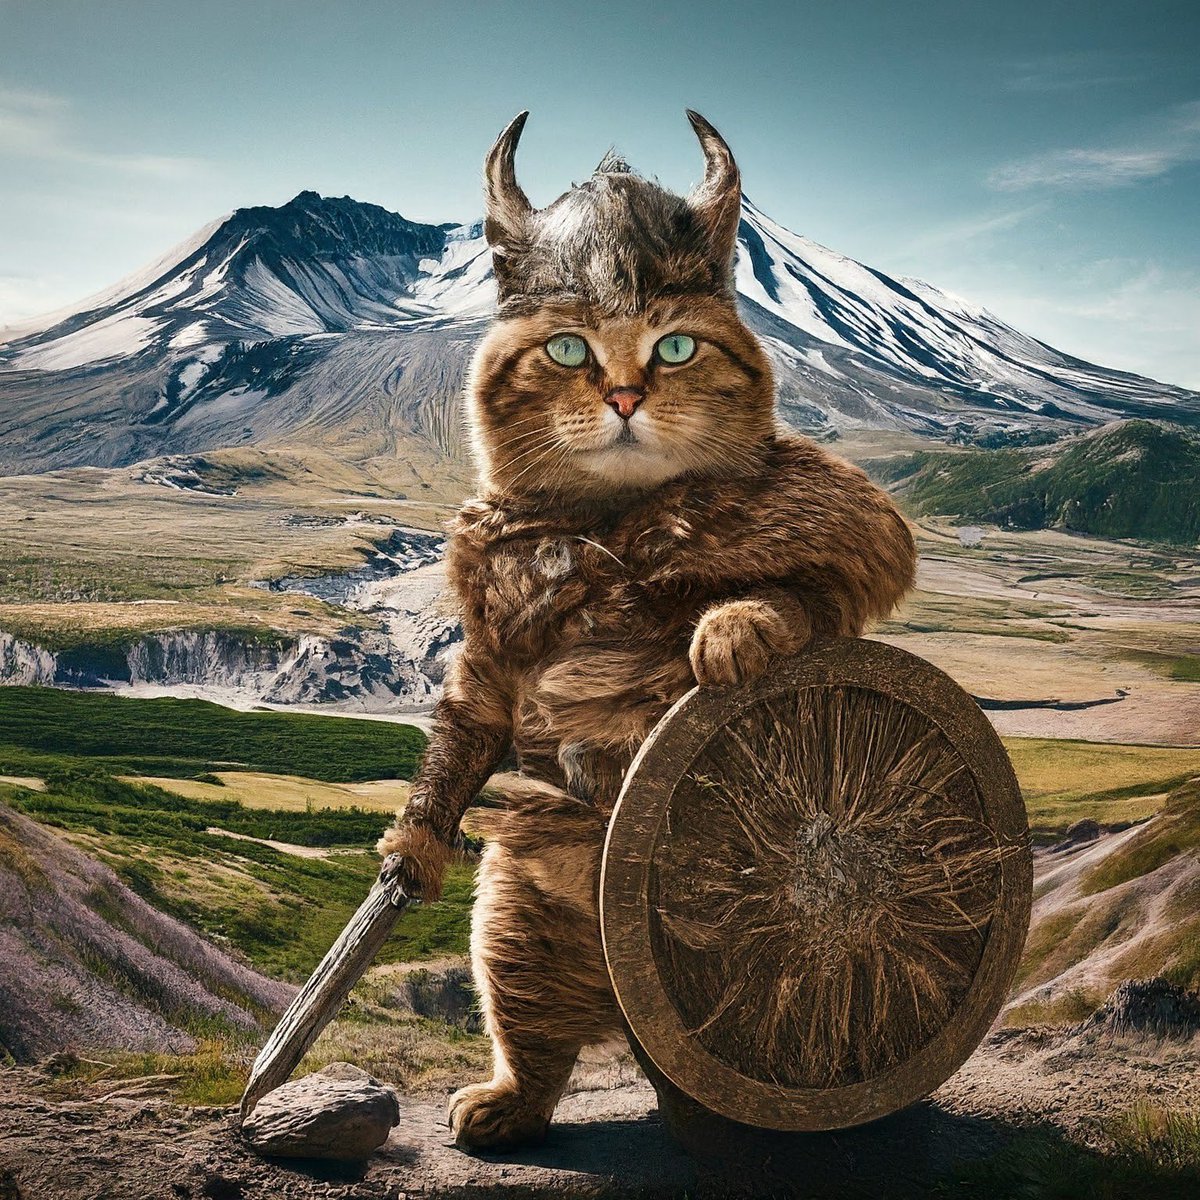 Floki Cat is consolidating soon it will erupt like Mount St Helen’s $FCAT #AltSeason is coming! #Solana #Solanamemes